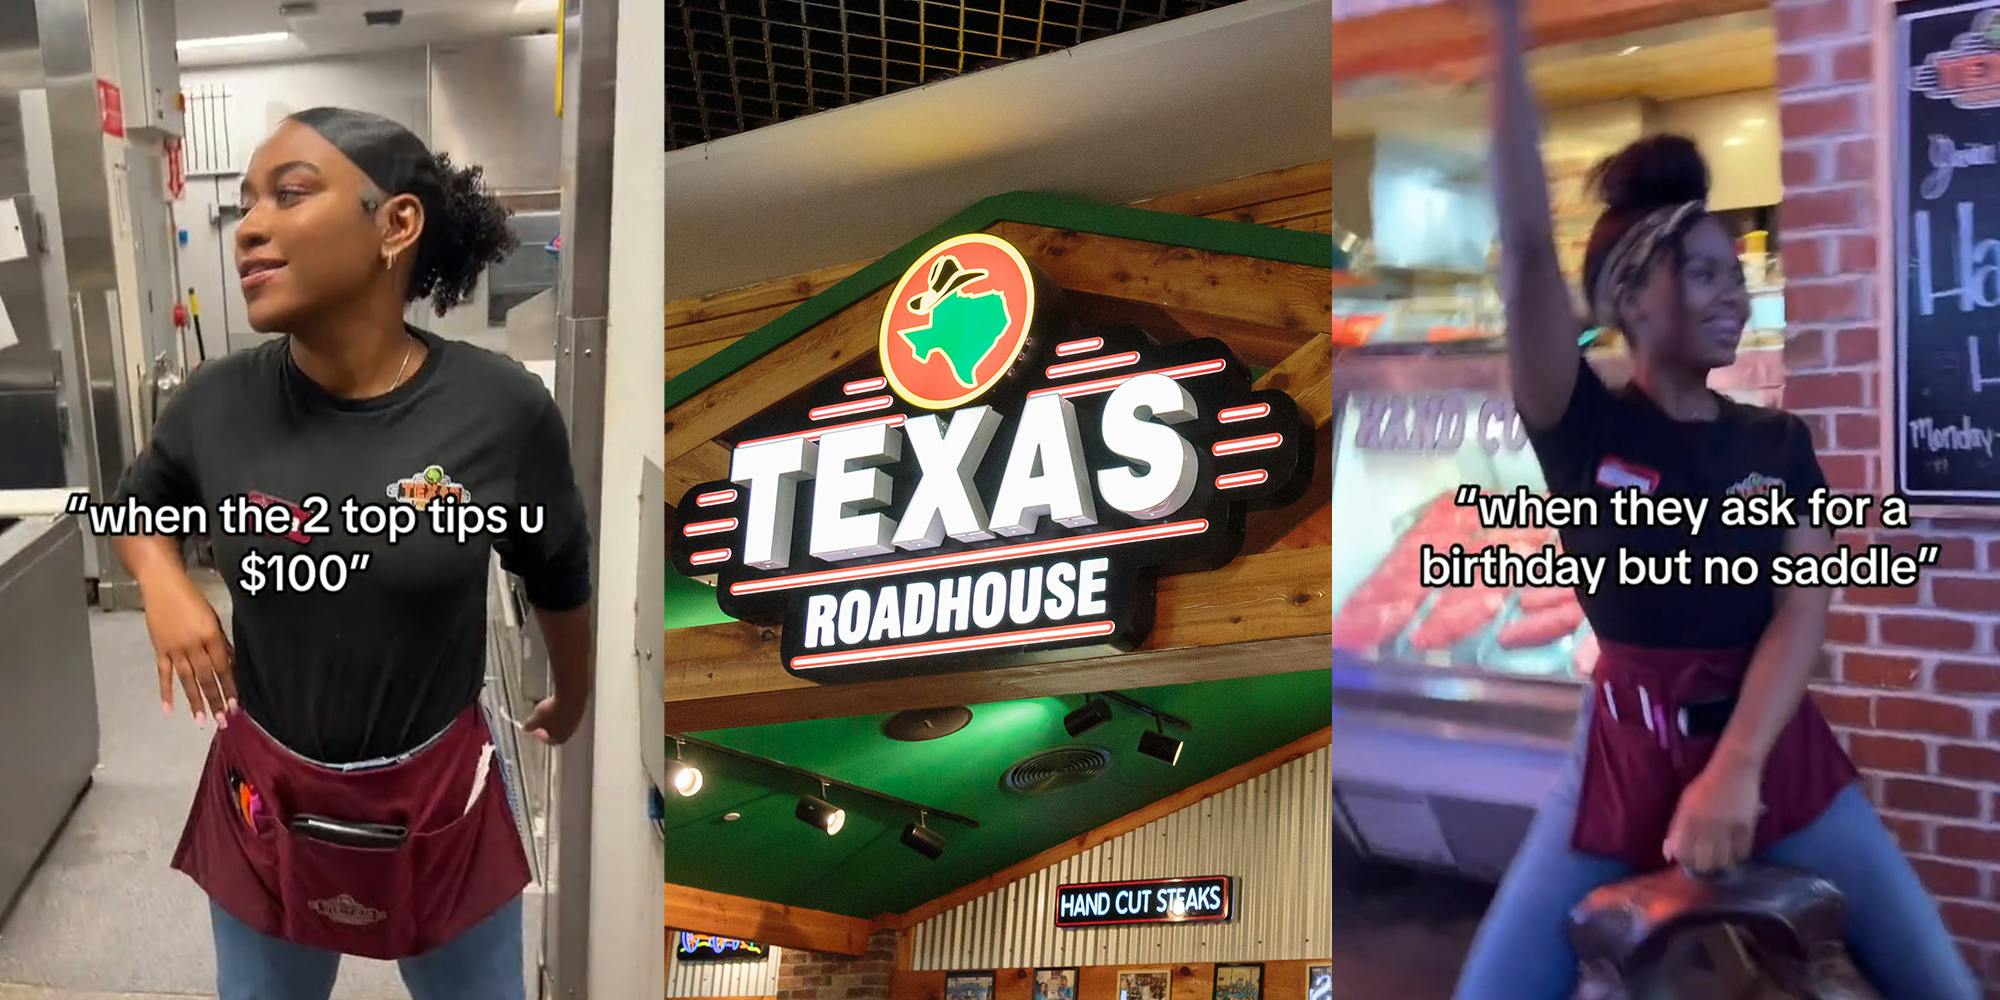 Texas Roadhouse workers praise customers who don’t want saddle on birthday